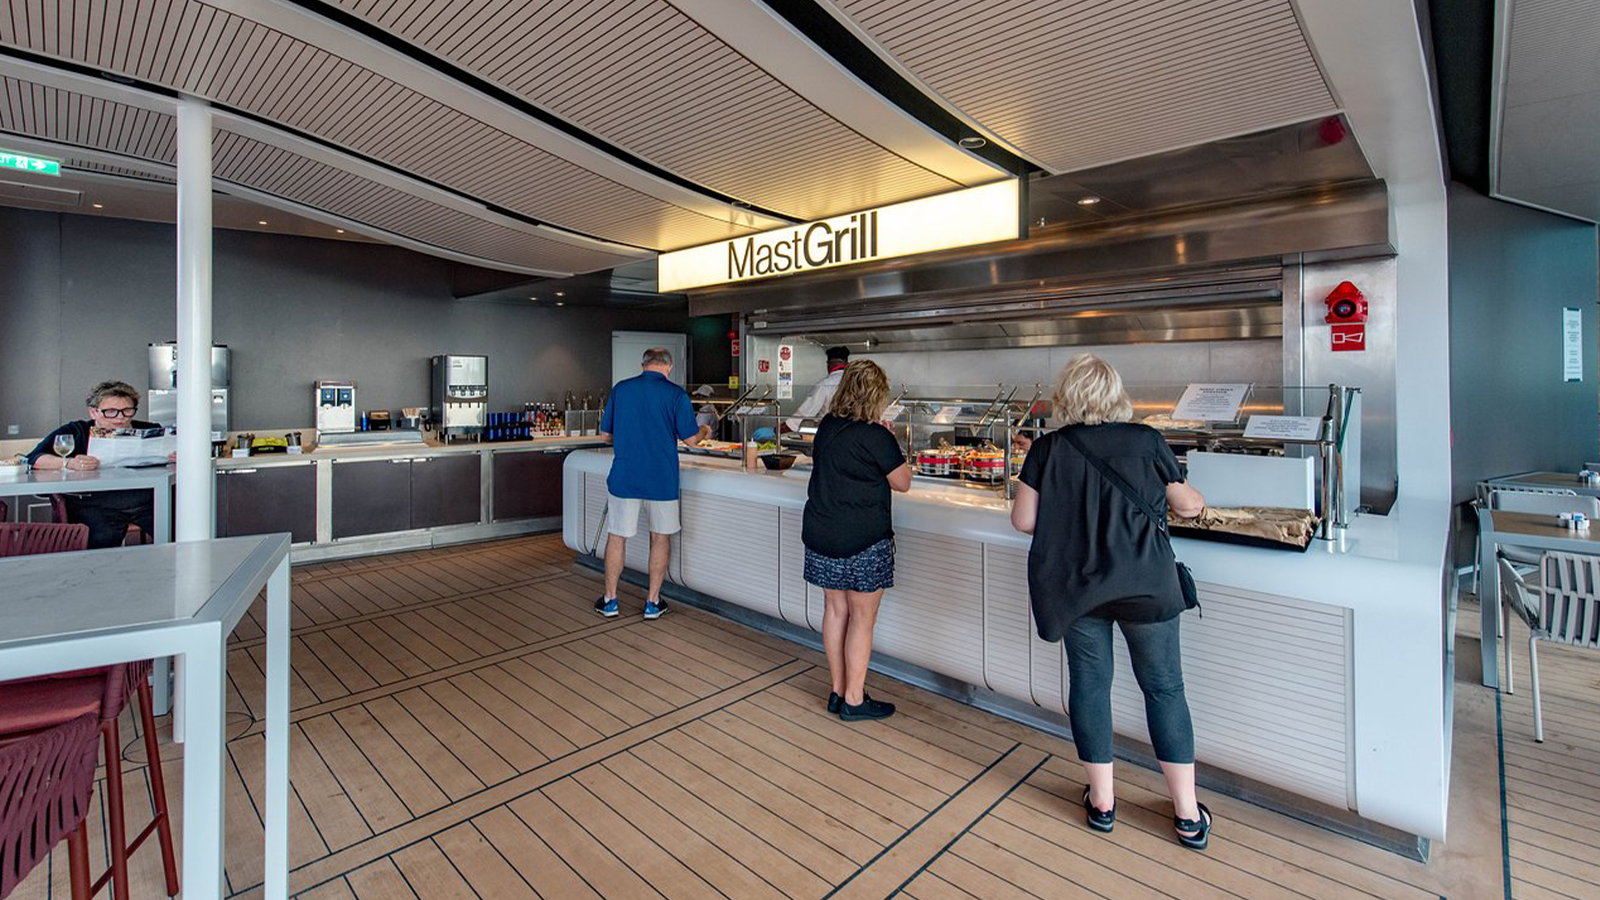 Mast Grill on the Celebrity Edge